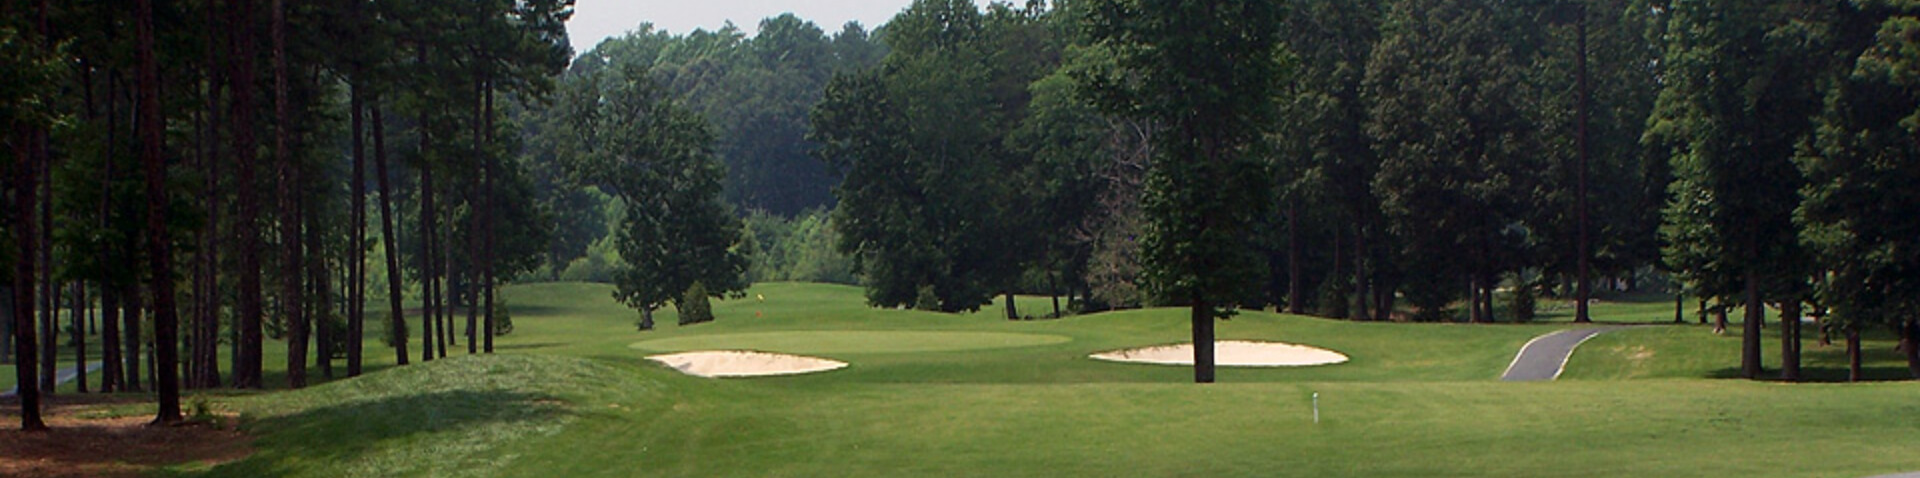 golf course with forest